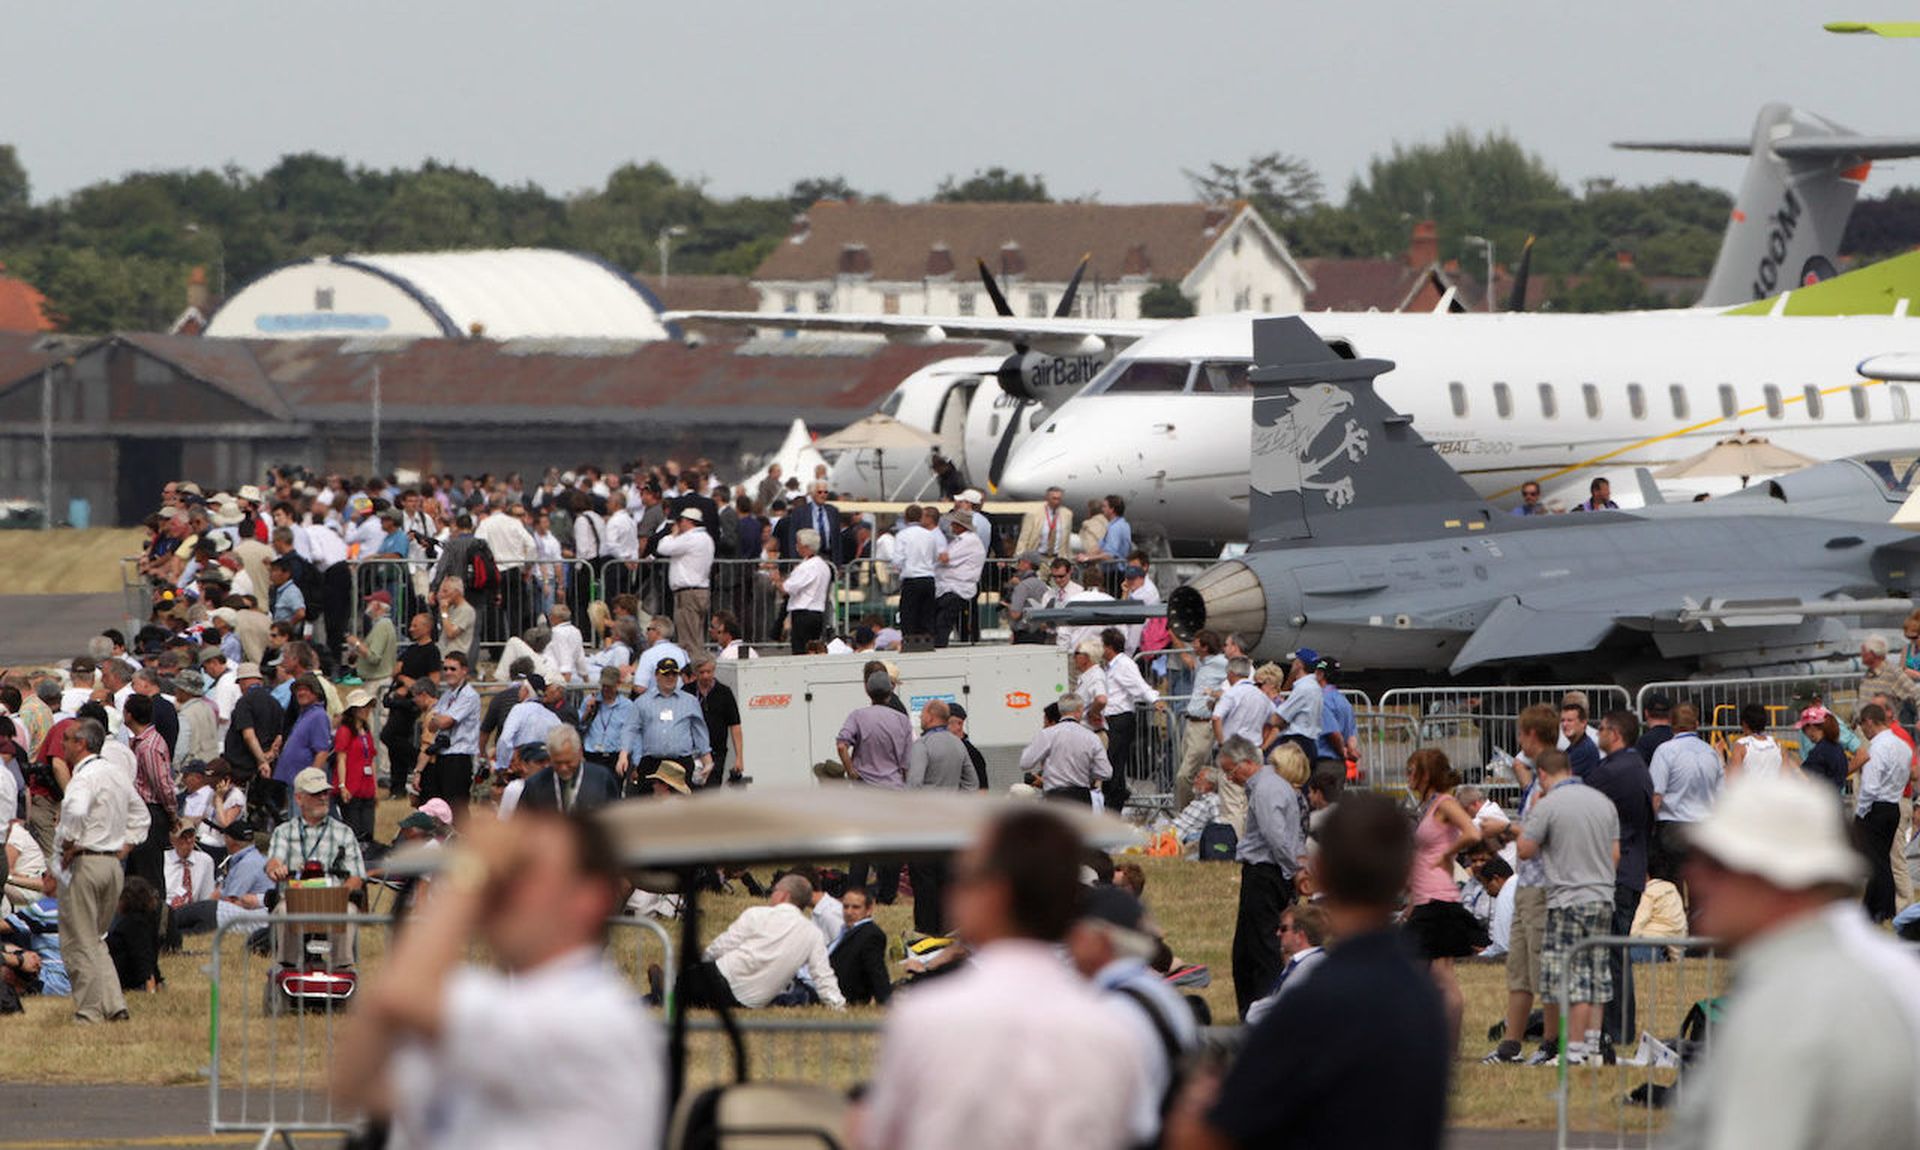 Members of the public observe military and commercial aircraft at the Farnborough Airshow on July 20, 2010 in Farnborough, England. The defense industrial base were the primary target in attacks leveraging Pulse Secure discovered in the spring. (Photo by Dan Kitwood/Getty Images)